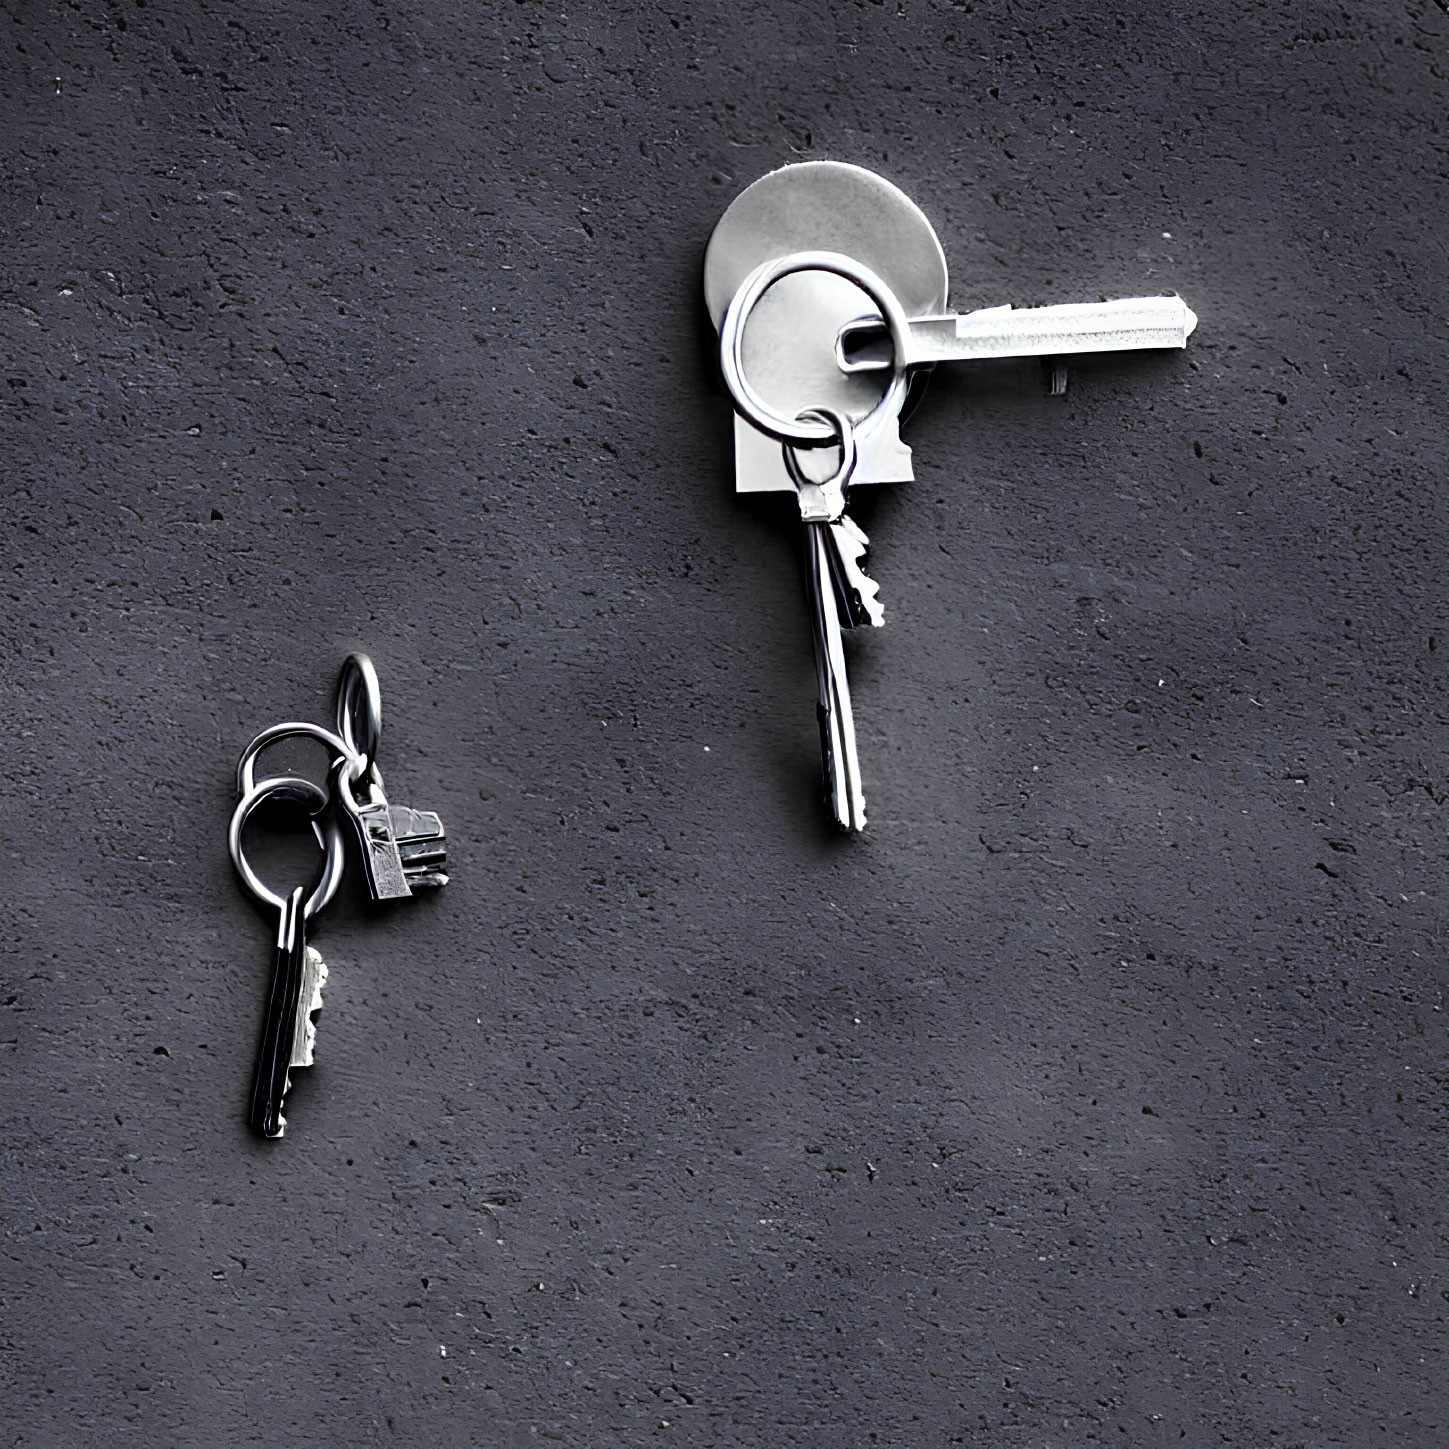 Keys inserted into textured gray wall with another set hanging